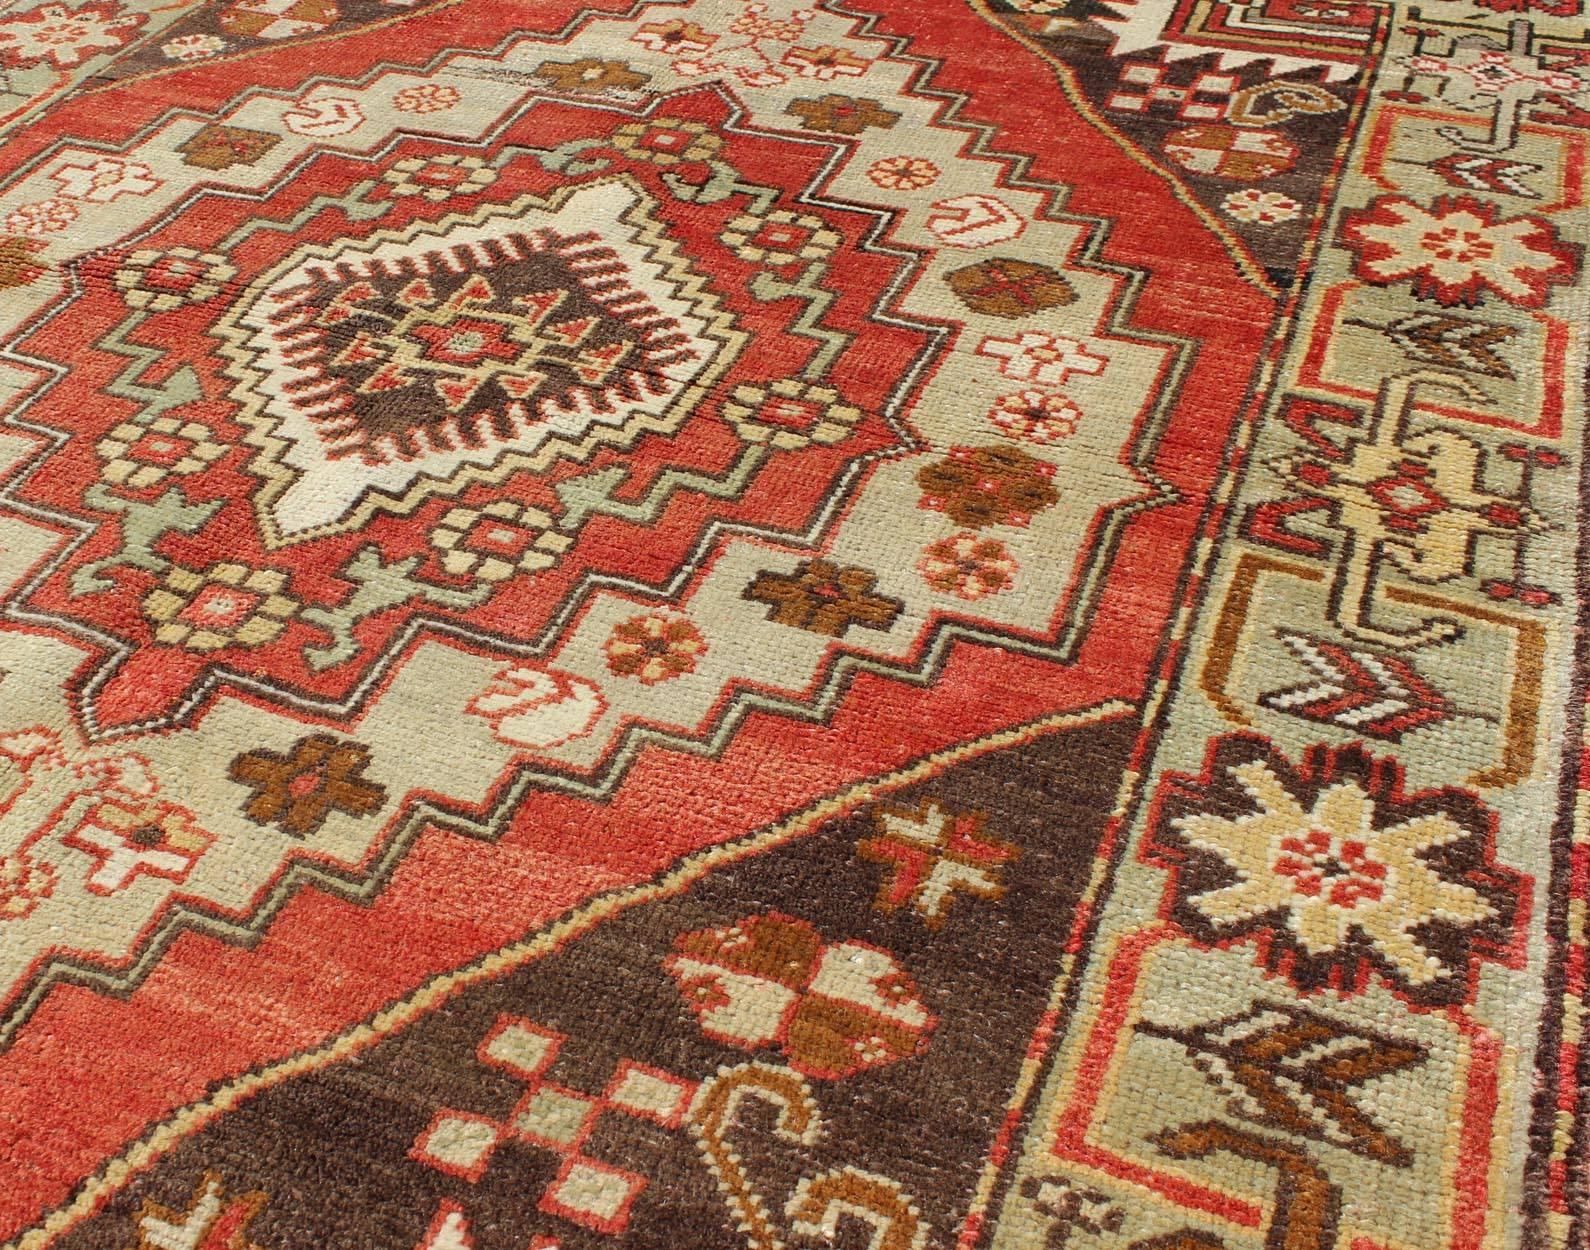 Multi-Layered Medallion Vintage Turkish Oushak Rug in Red, Brown, Mint Green In Excellent Condition For Sale In Atlanta, GA